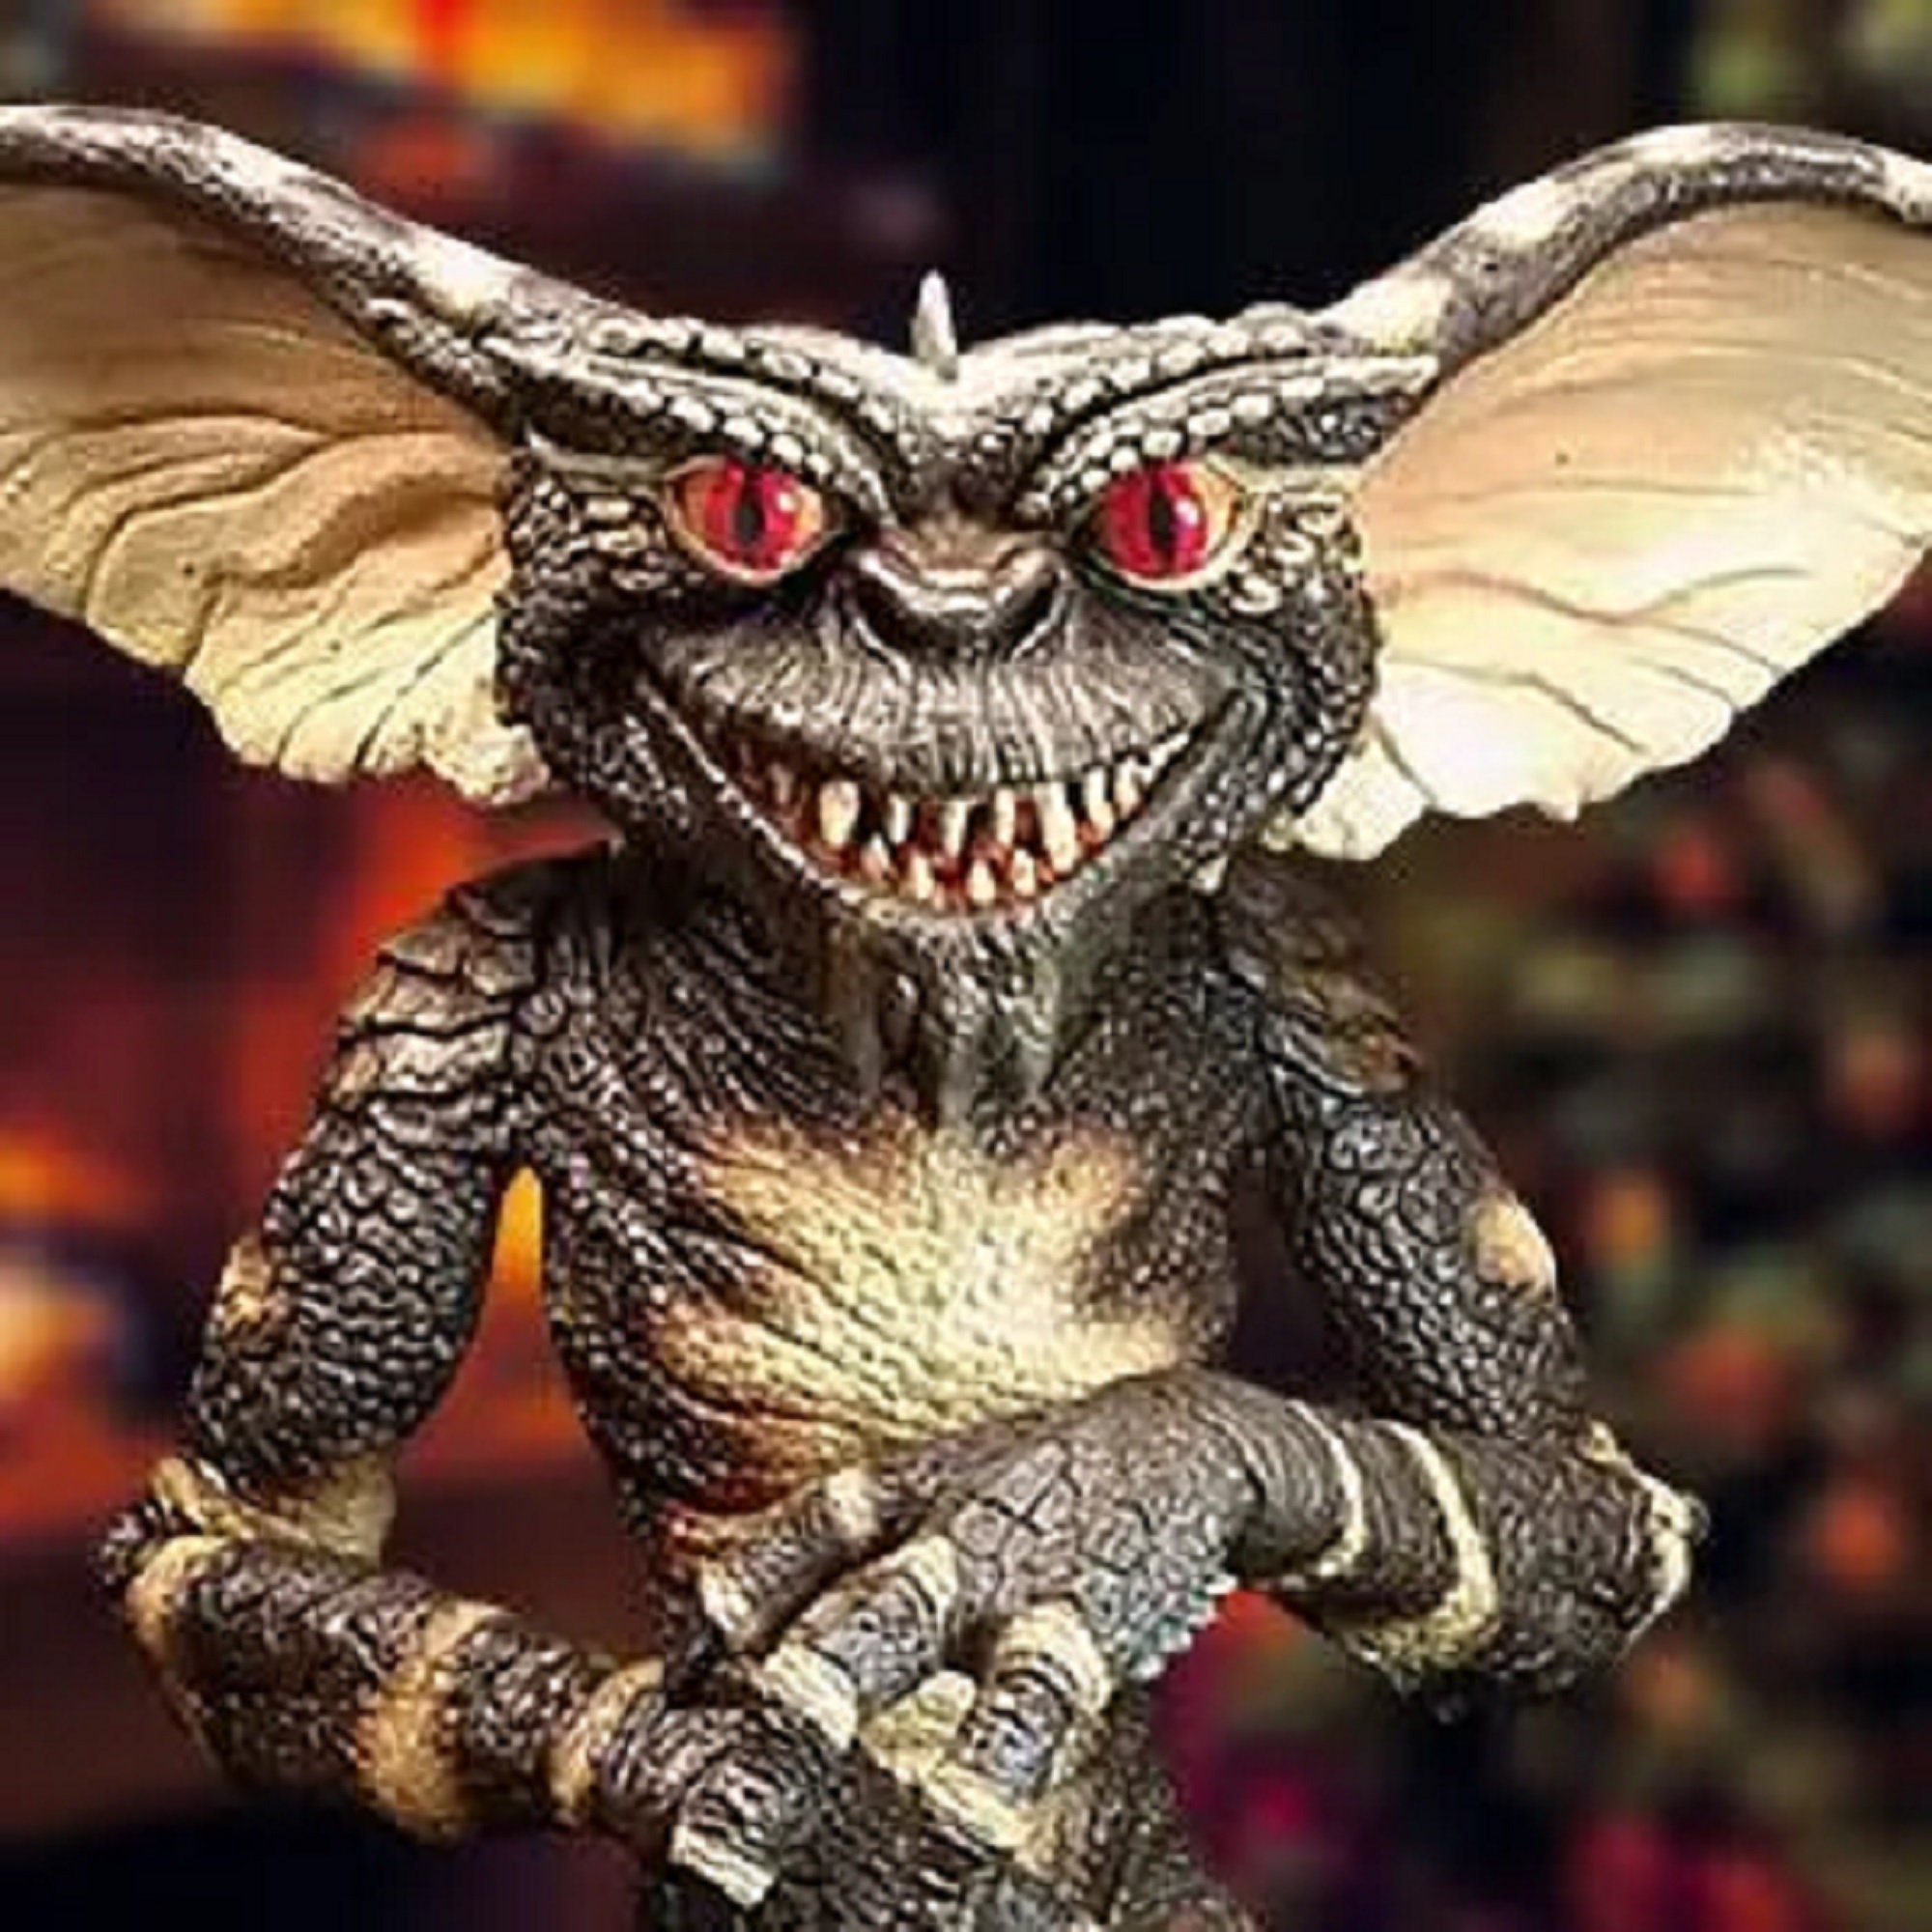 On Sale 25% off New GREMLINS EVIL GREMLIN Puppet Prop Trick or Treat  Studios Free Shipping Brand New Item With Tags -  Hong Kong